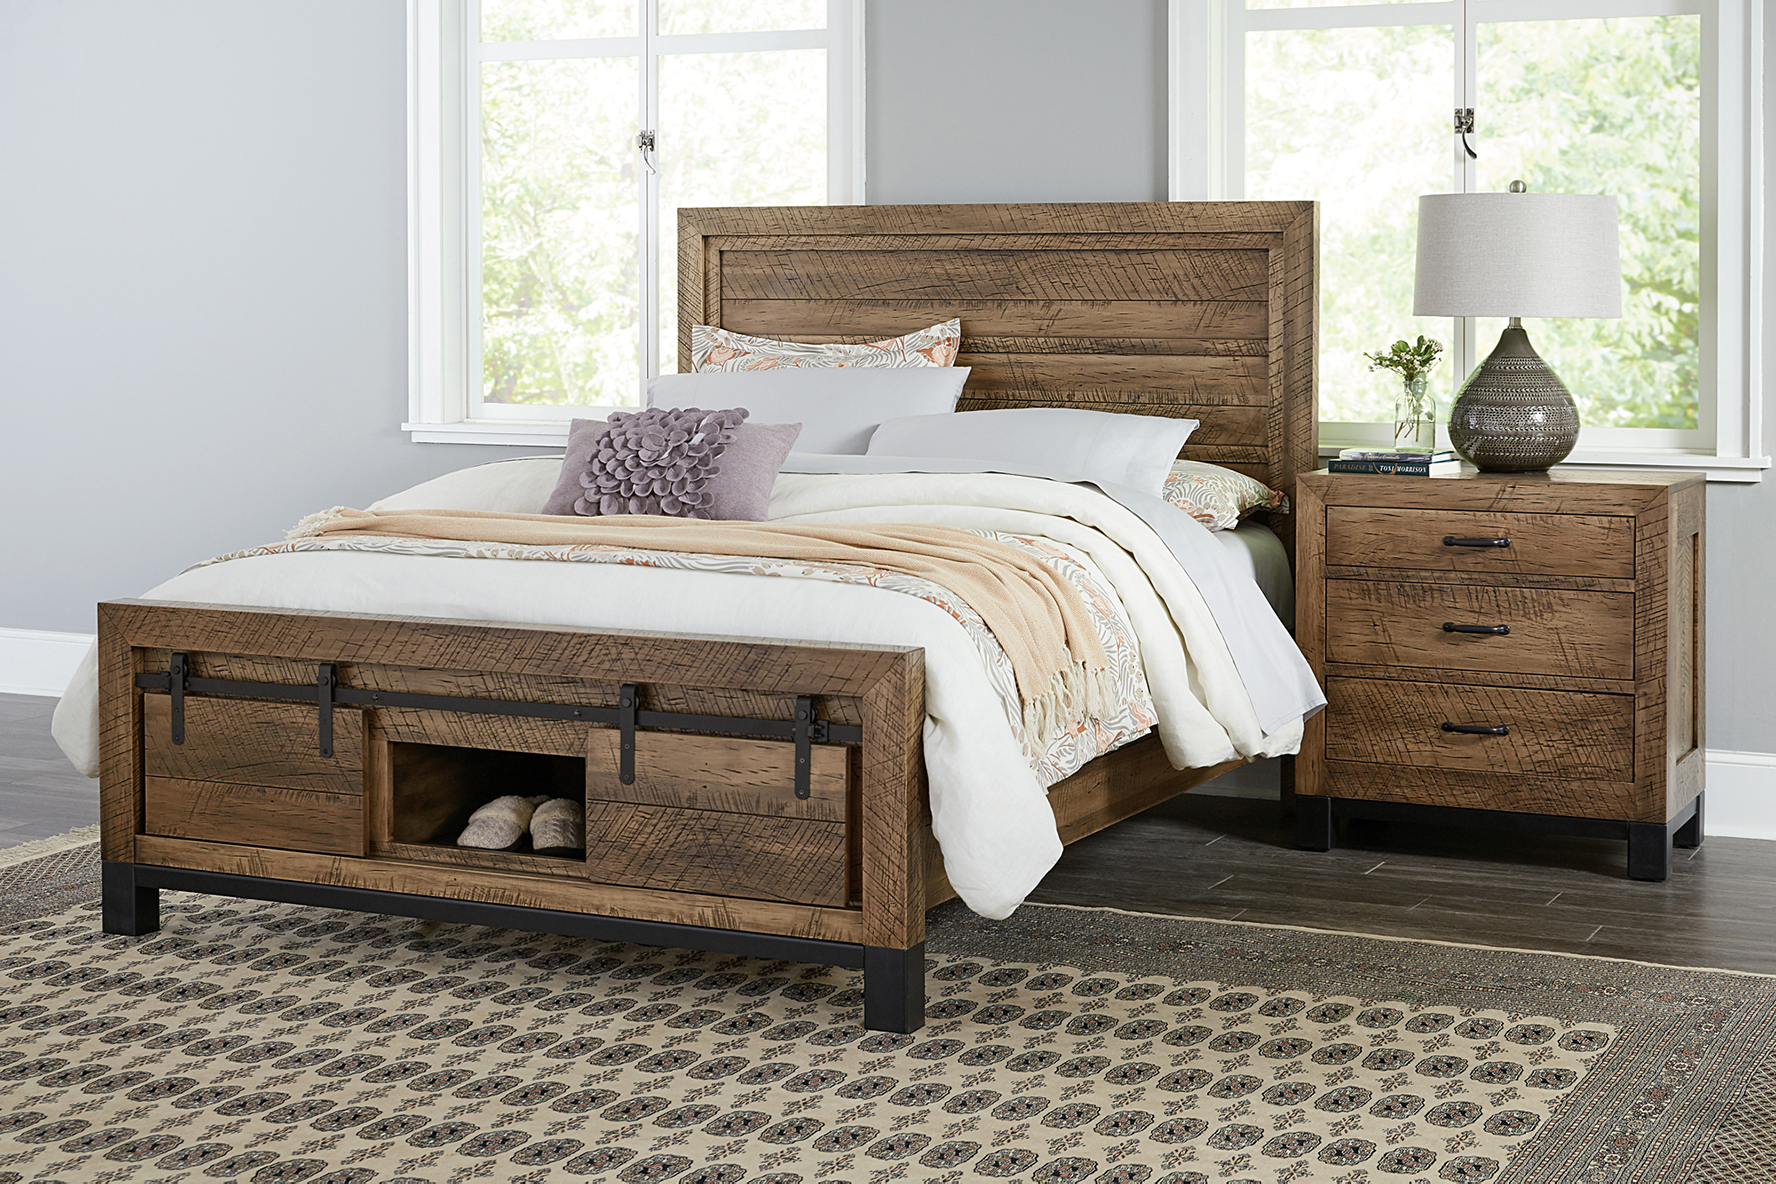 sonoma bedroom furniture collection